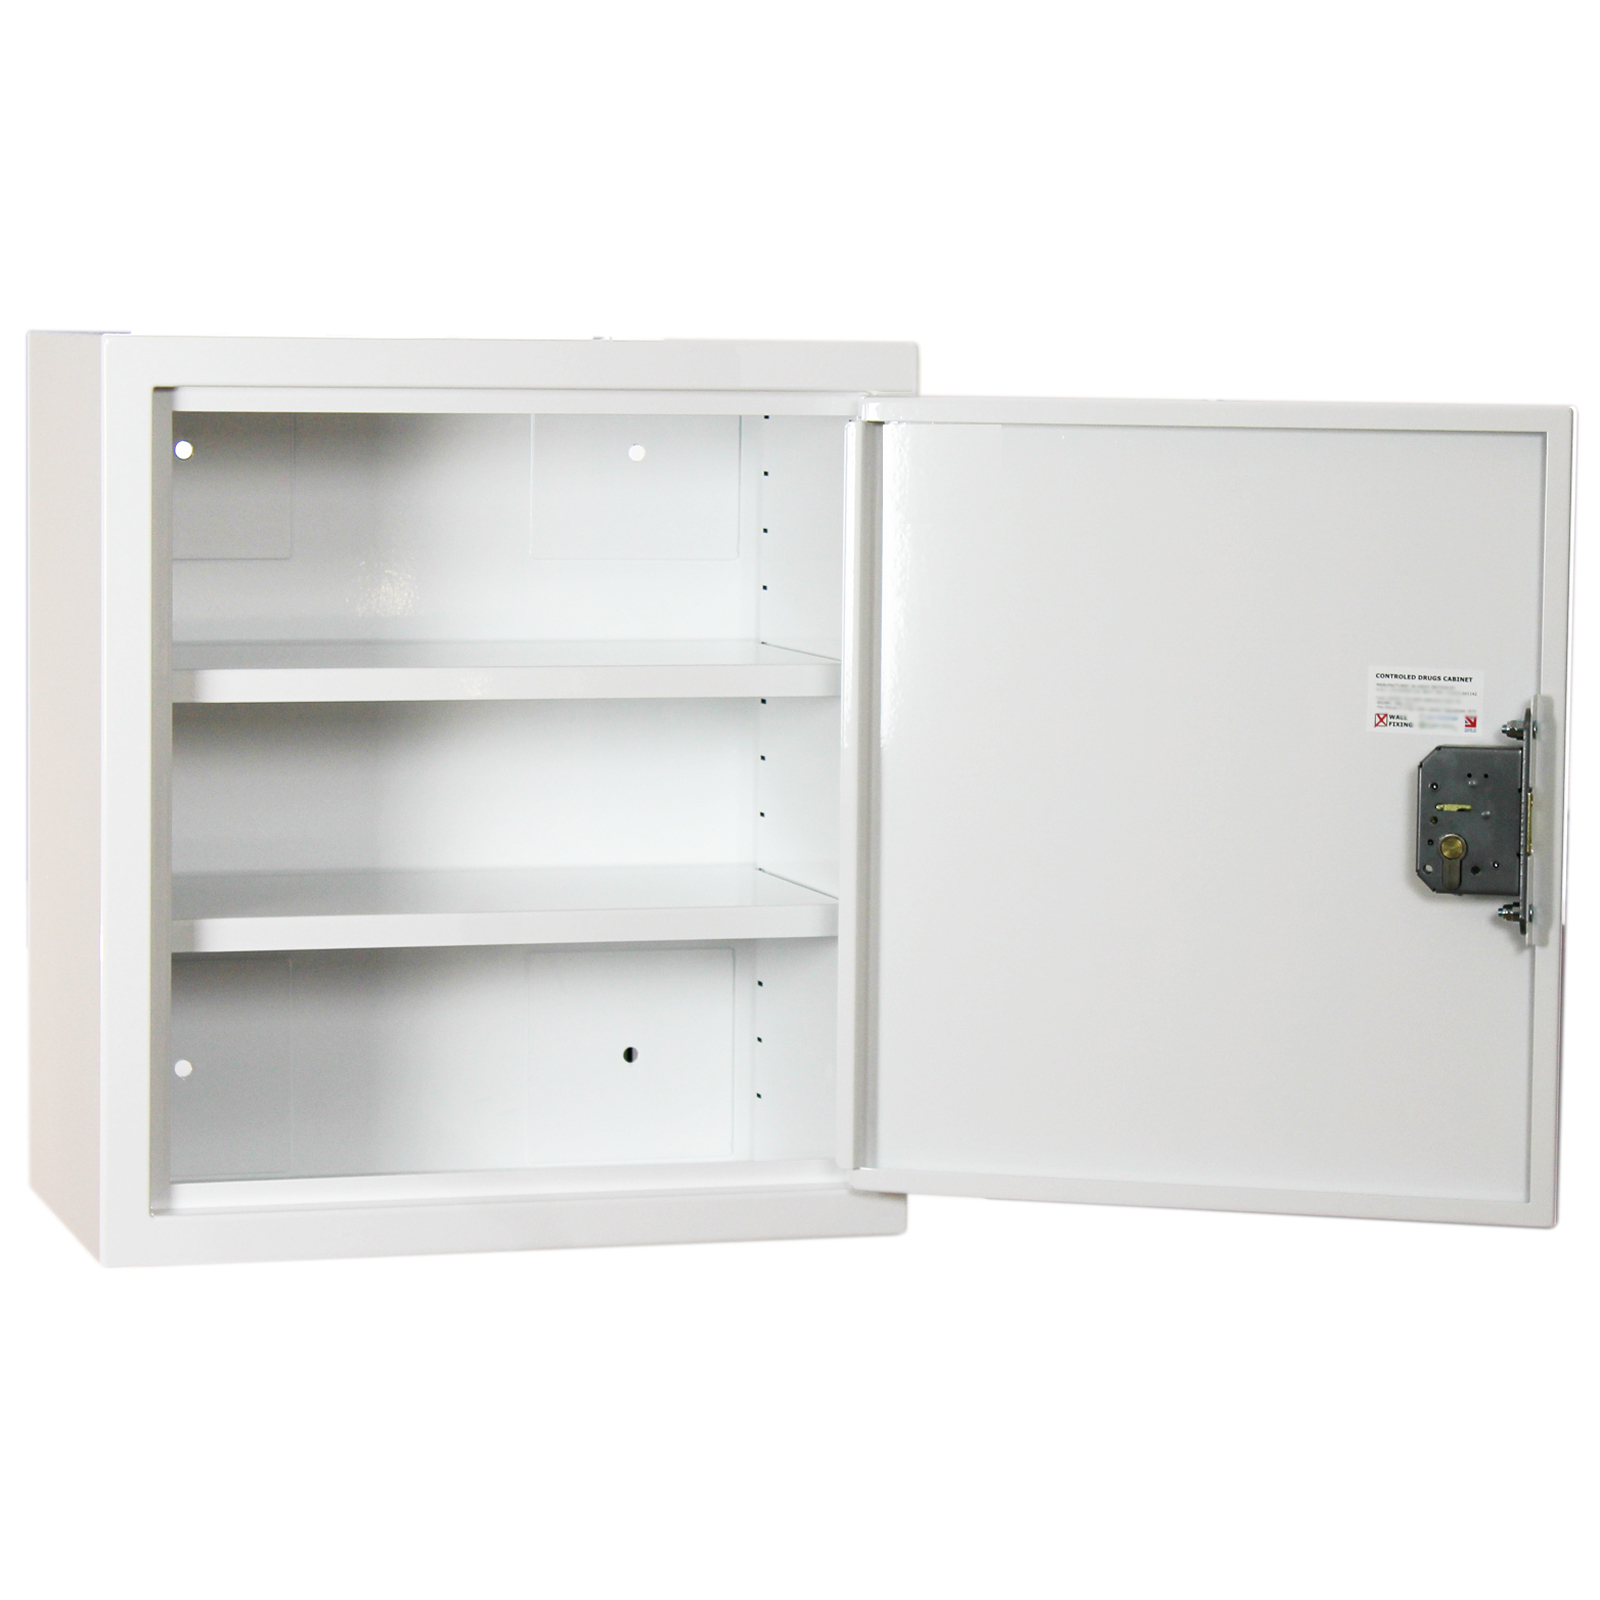 FPD 12146 controlled drug cabinet with open door